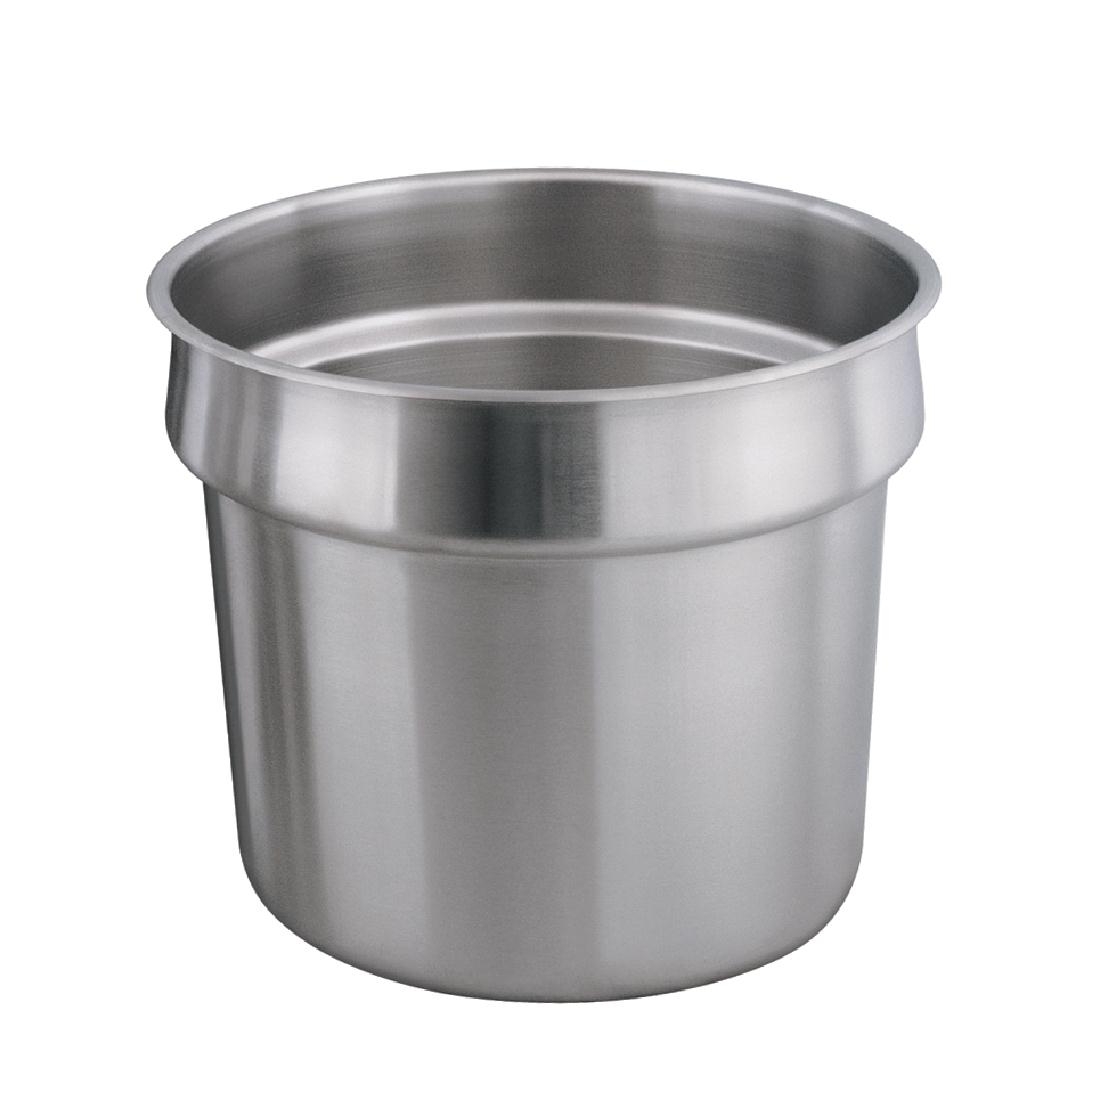 Hatco 7 Litre Bain Marie Liner with Lid RCTHW-7Q